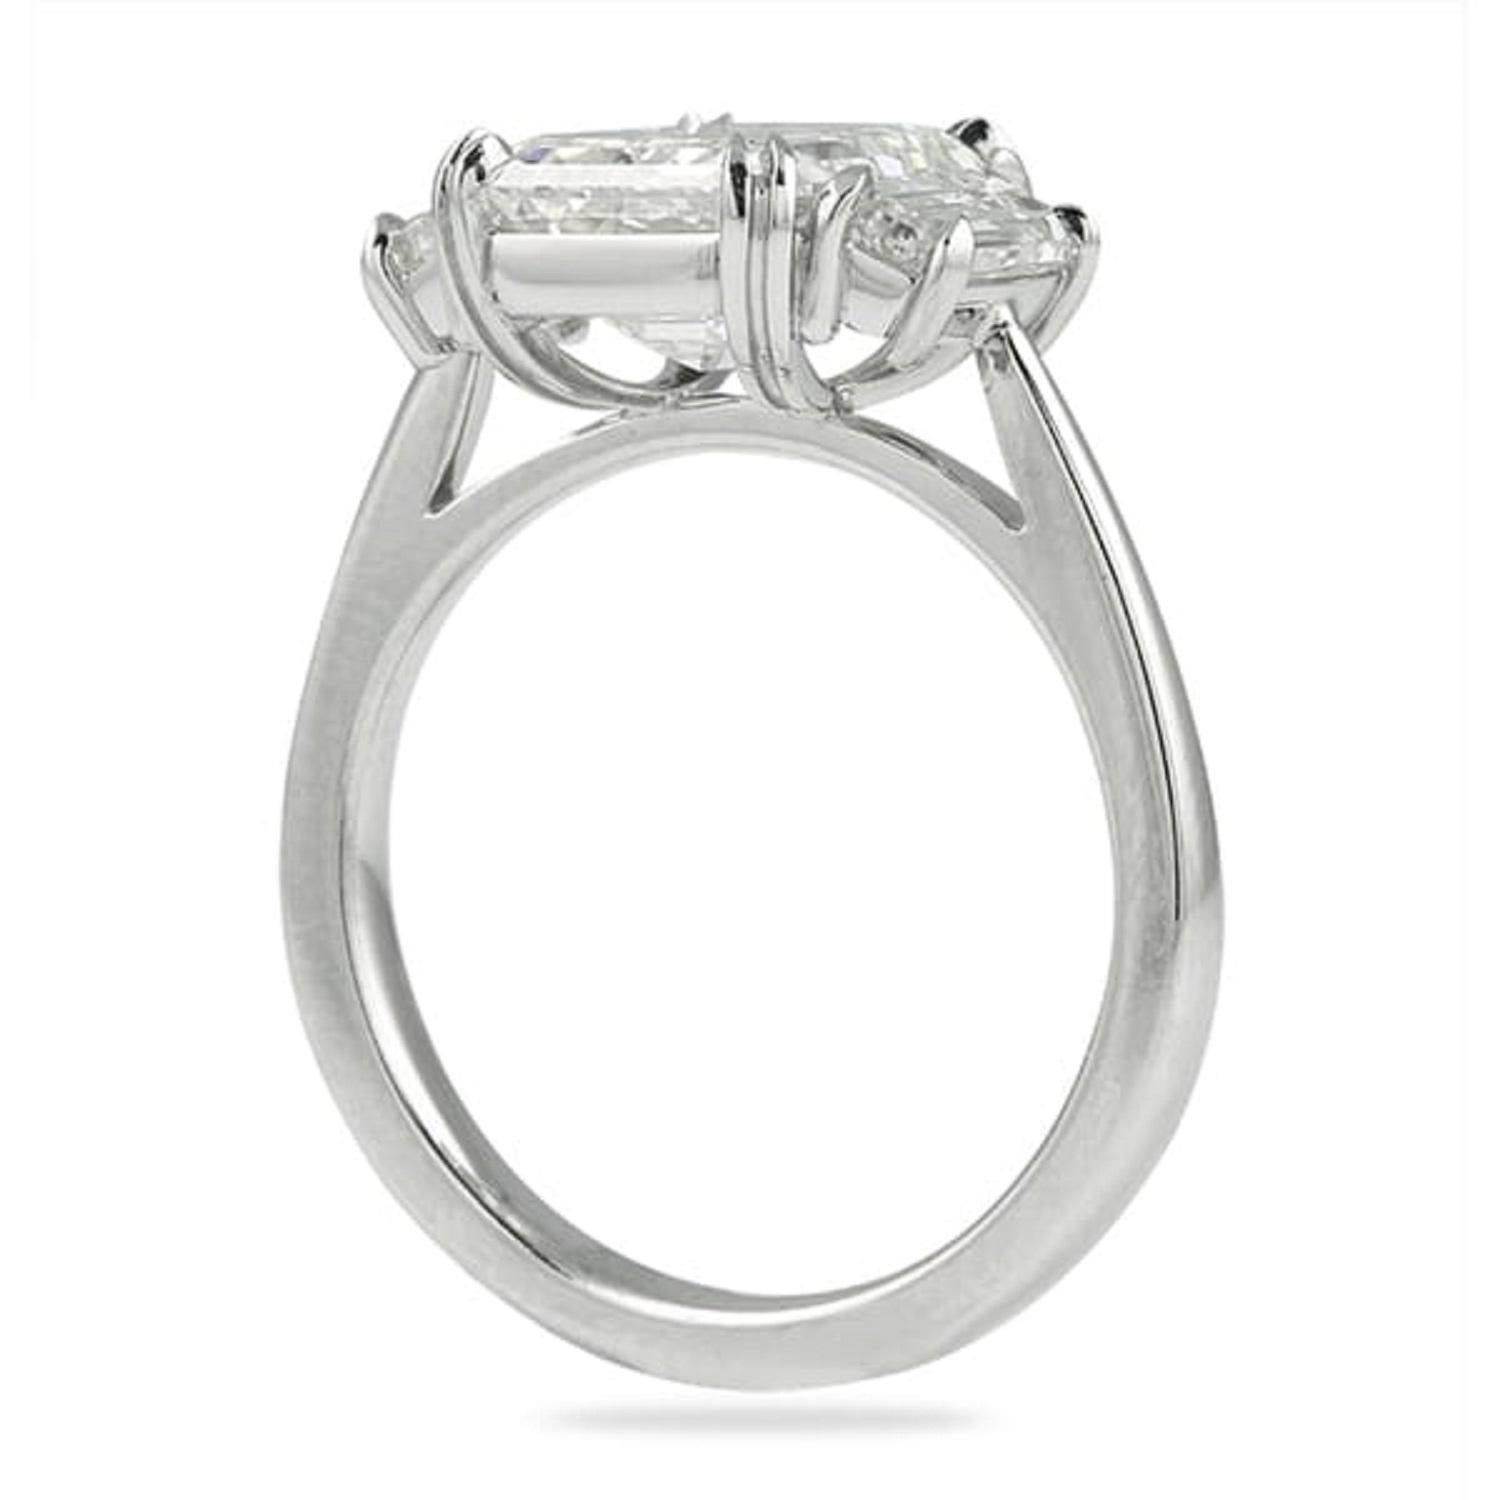 This lovely and significant ring centers on a 2 carat emerald-cut diamond with E rare white color and Internally Flawless clarity. The Internally Flawless stone is flanked by two trapezoid-cut diamonds totaling mounted in platinum. 

Internally